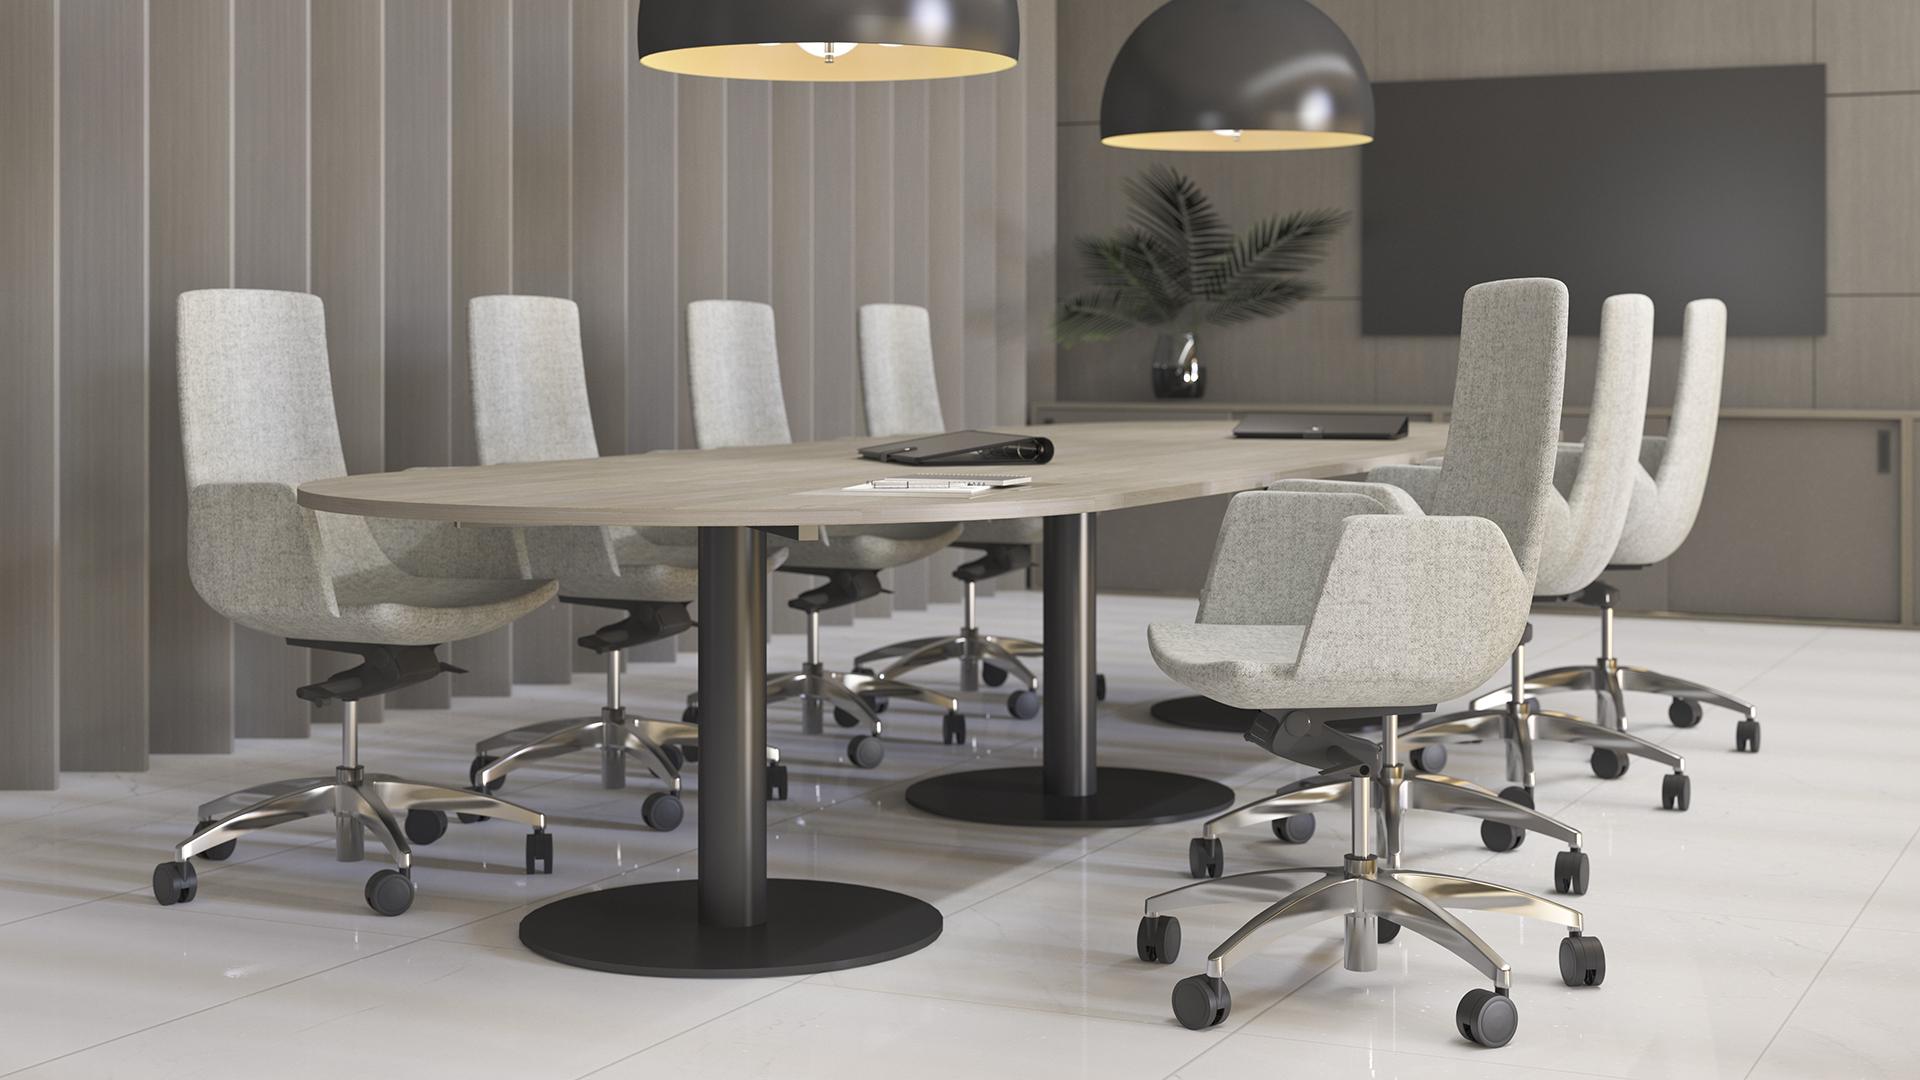 Forum Meeting Table with black bases